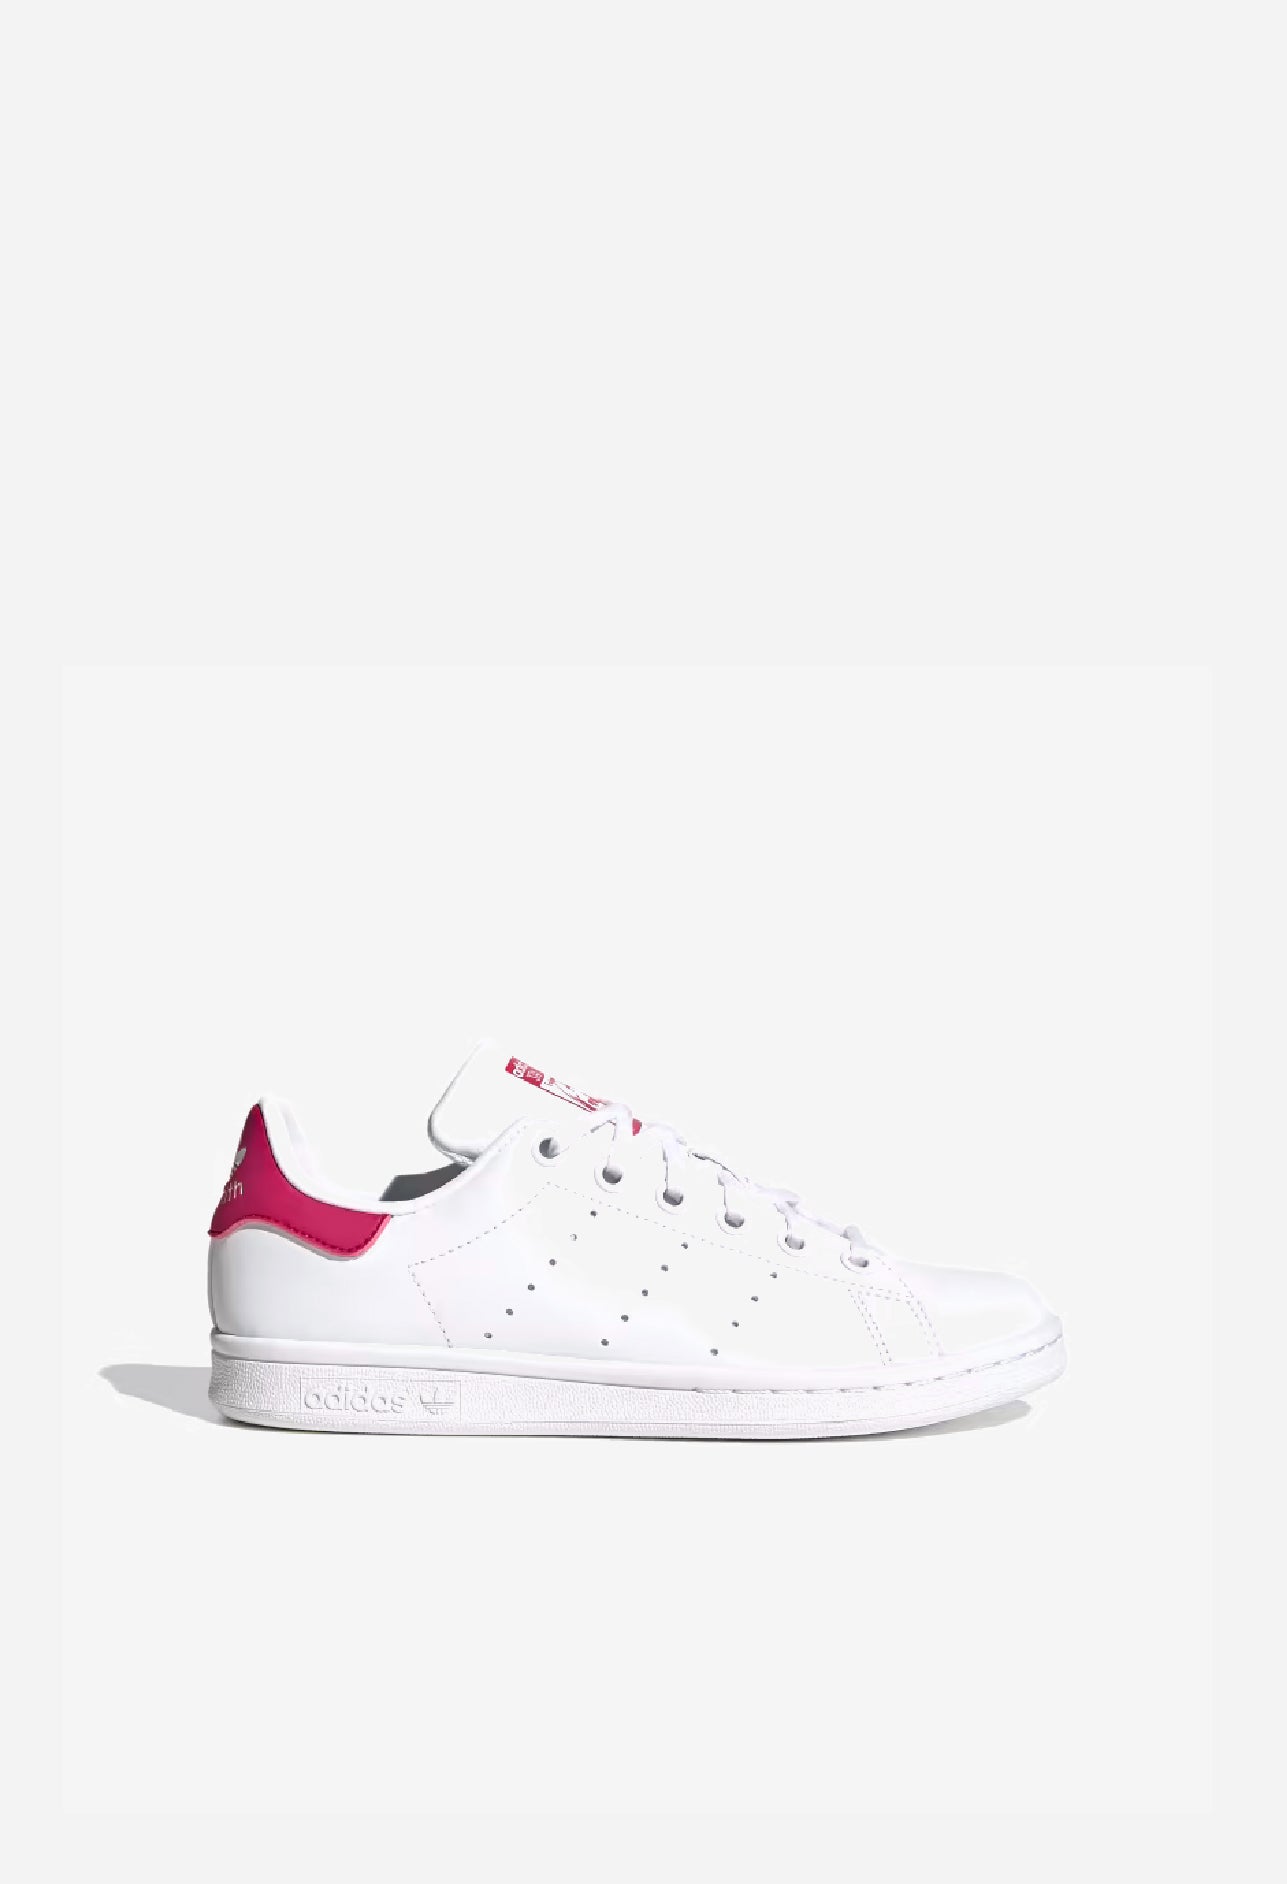 Adidas Stan Smith Shoes (GS)